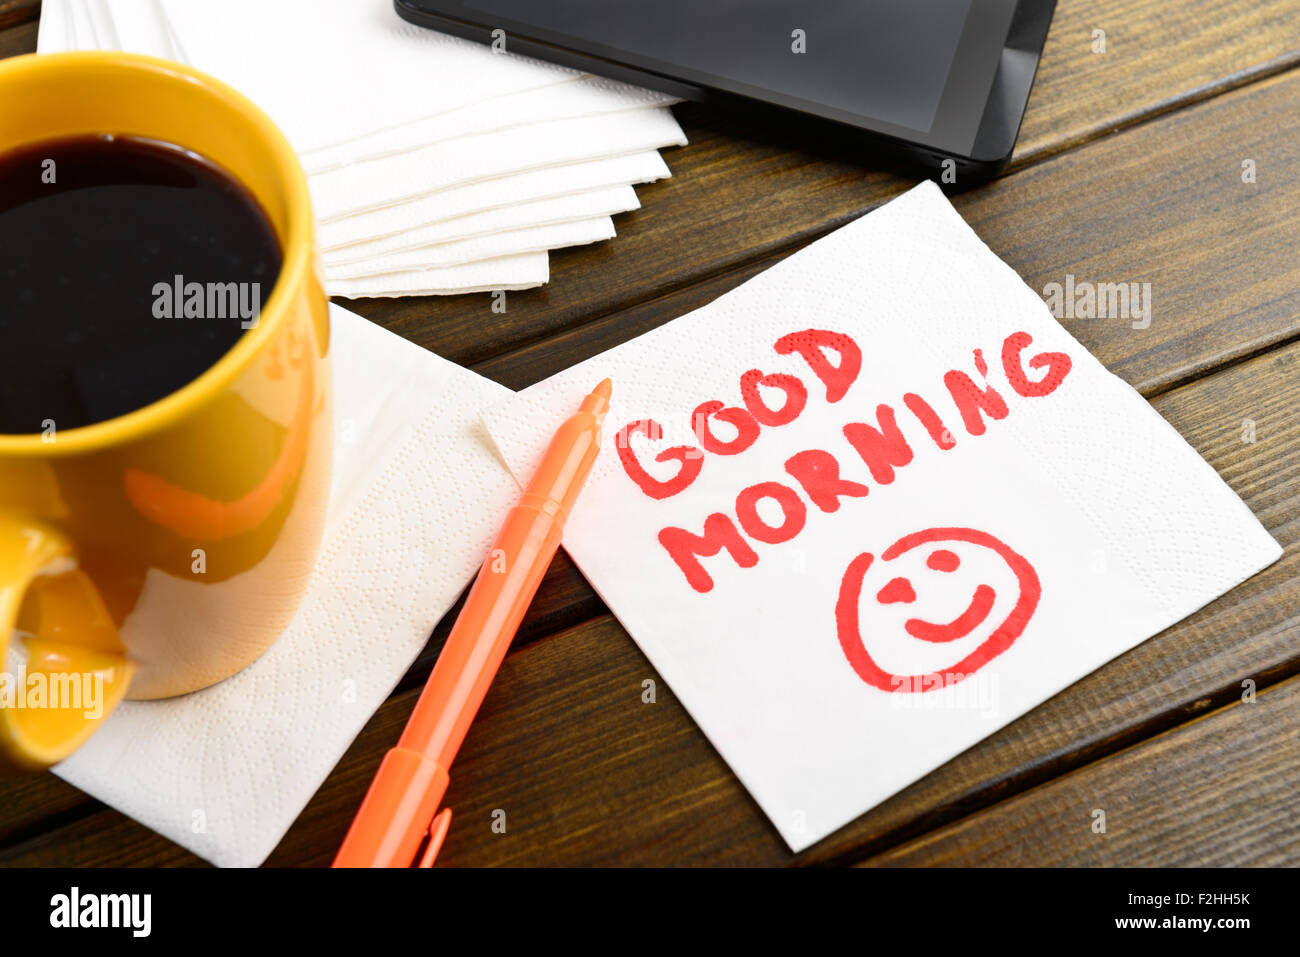 Good morning writing on white napkin around coffee pen and phone on wooden table Stock Photo